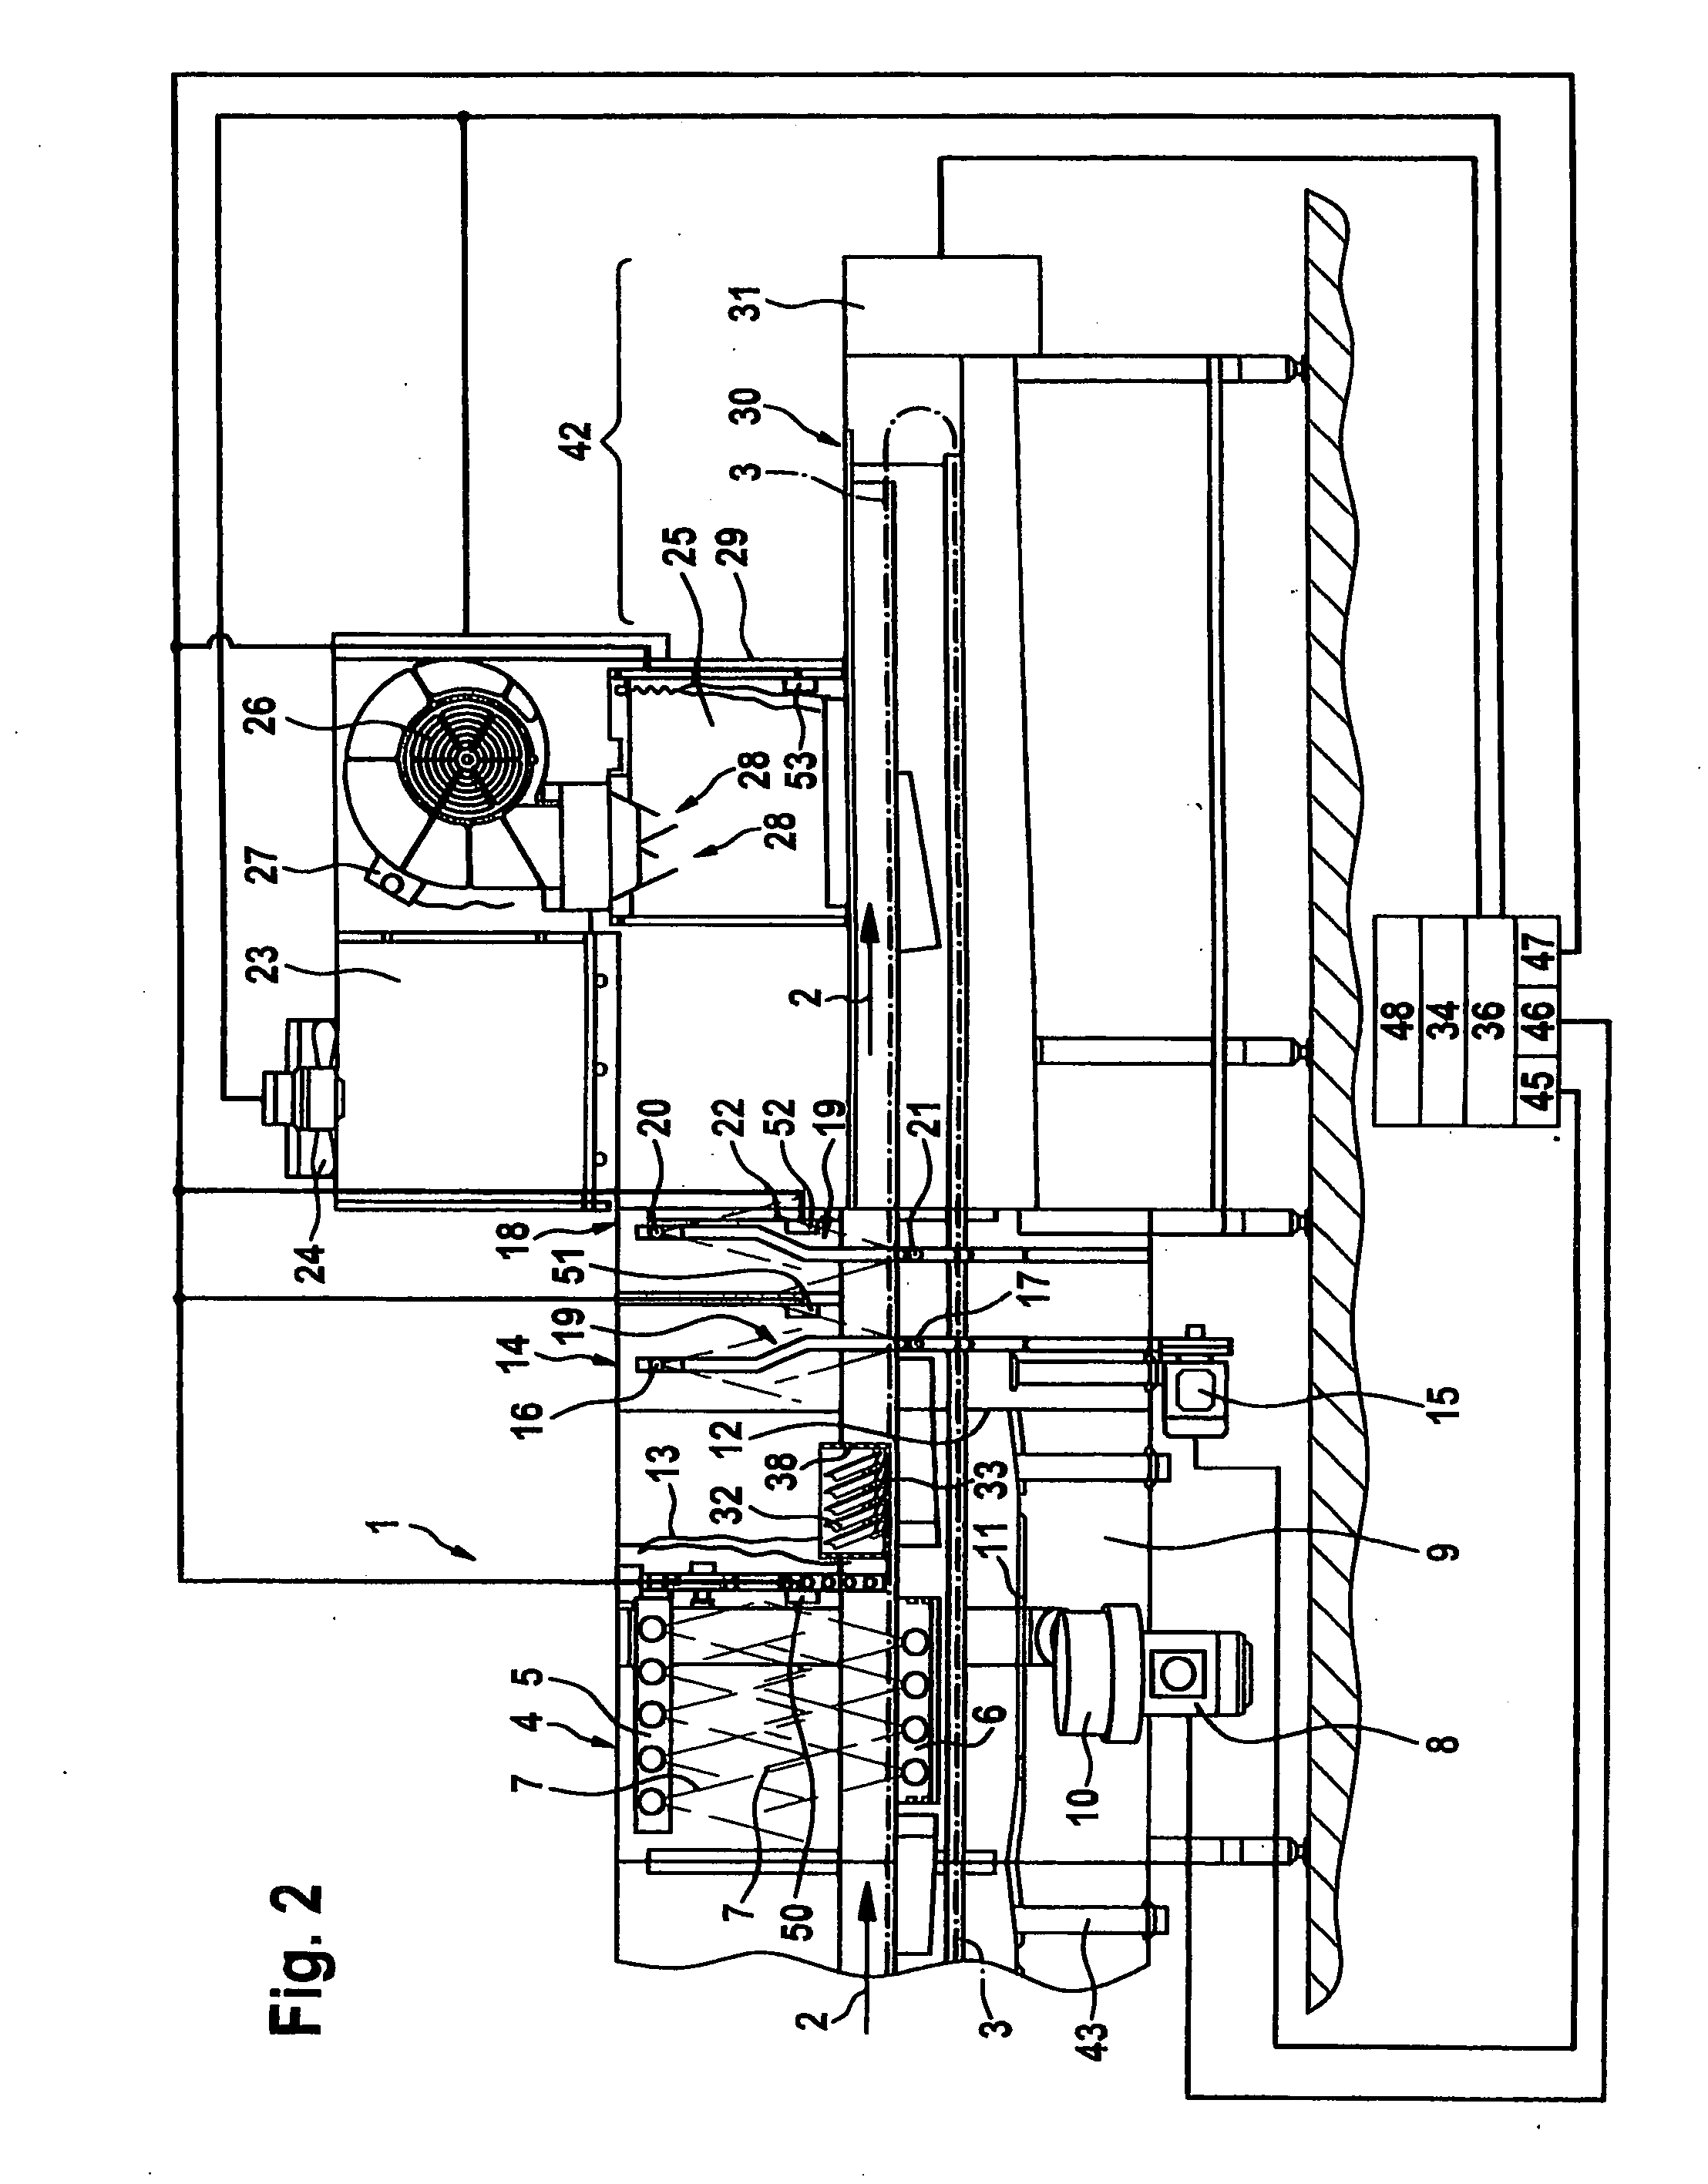 Method for assessing and guaranteeing the thermal hygiene efficiency in a multi-tank dishwasher